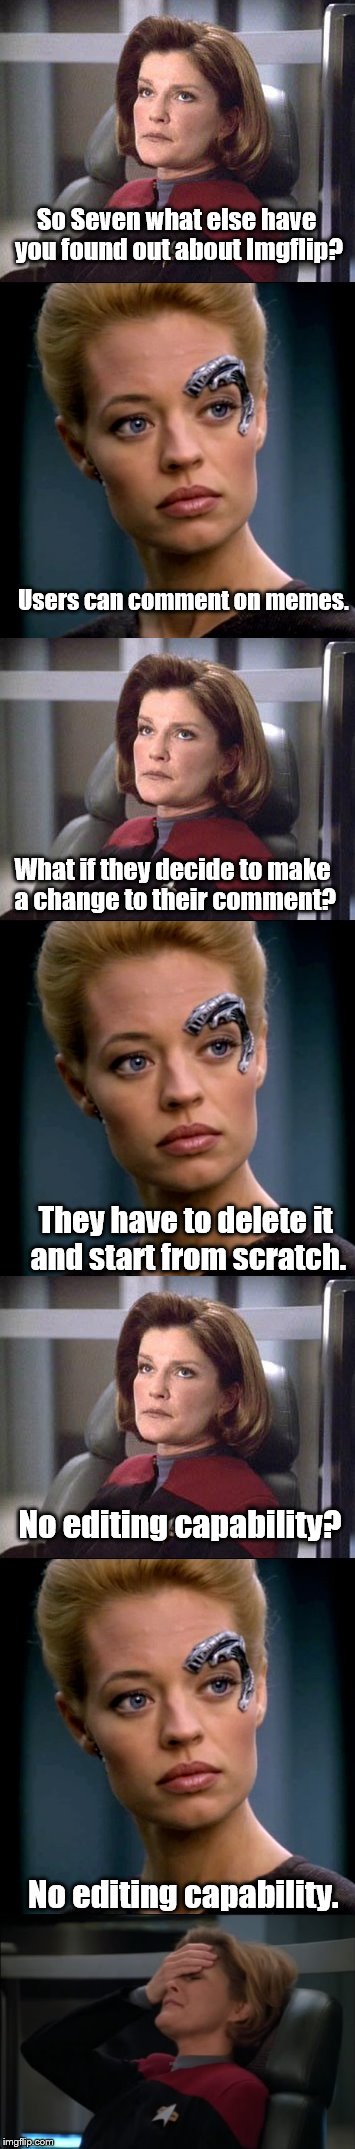 Captain Janeway Learns Something Else About Imgflip | So Seven what else have you found out about Imgflip? Users can comment on memes. What if they decide to make a change to their comment? They have to delete it and start from scratch. No editing capability? No editing capability. | image tagged in memes,imgflip,imgflip users,imgflippers,welcome to imgflip | made w/ Imgflip meme maker